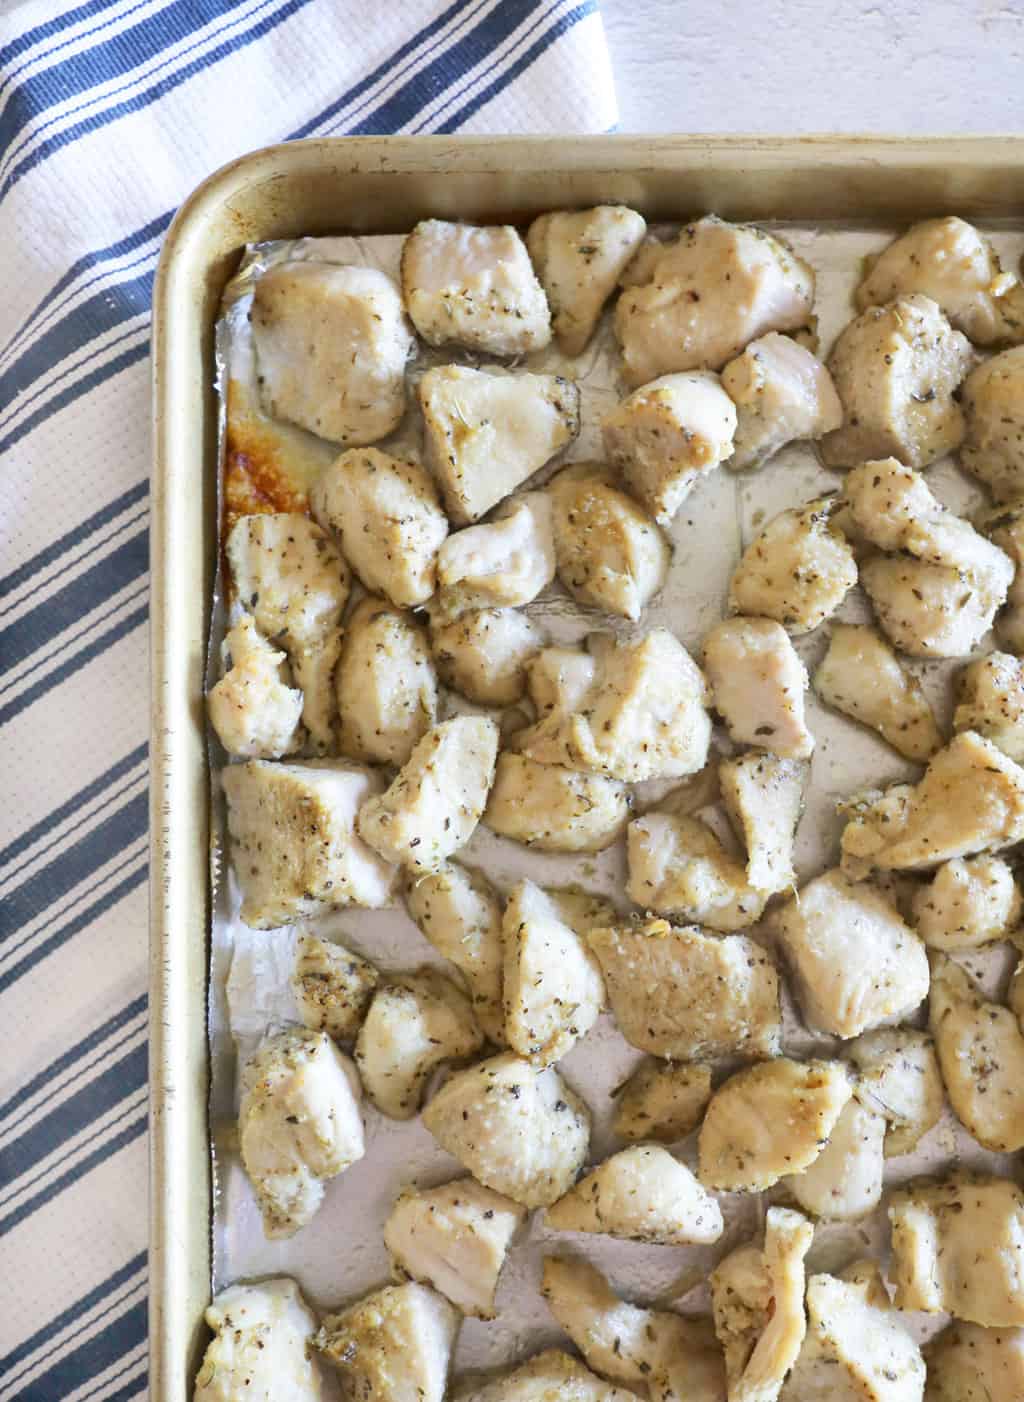 baked chicken bites just out of the oven on a sheet pan